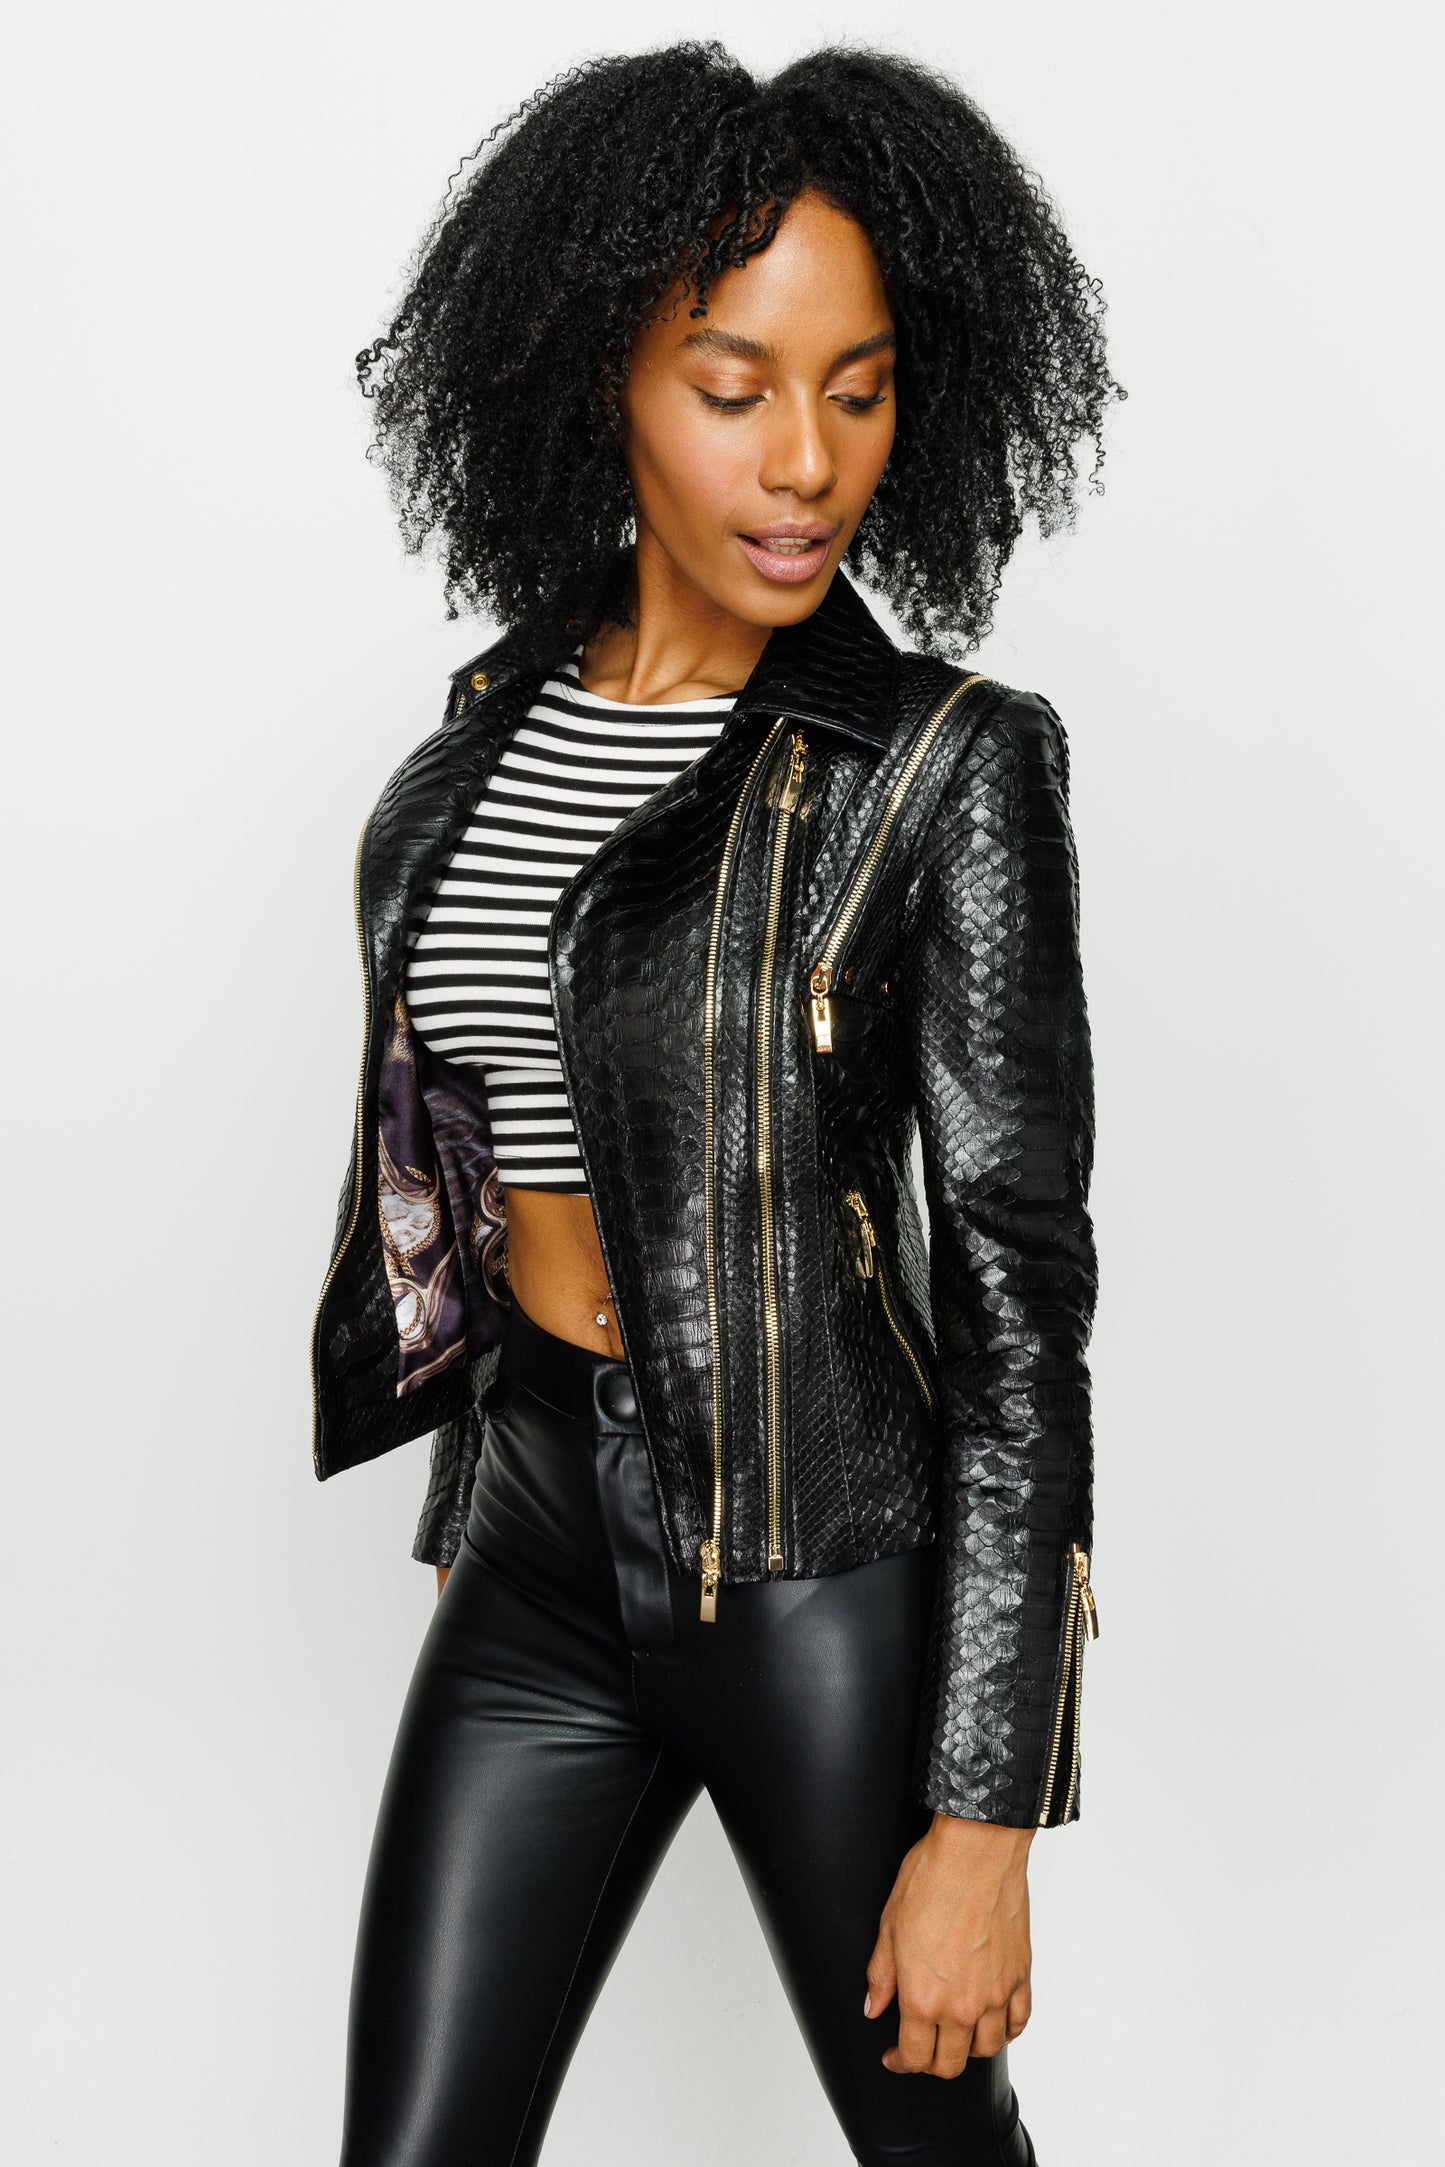 The Queen Pythn Skin Black Leather Jacket